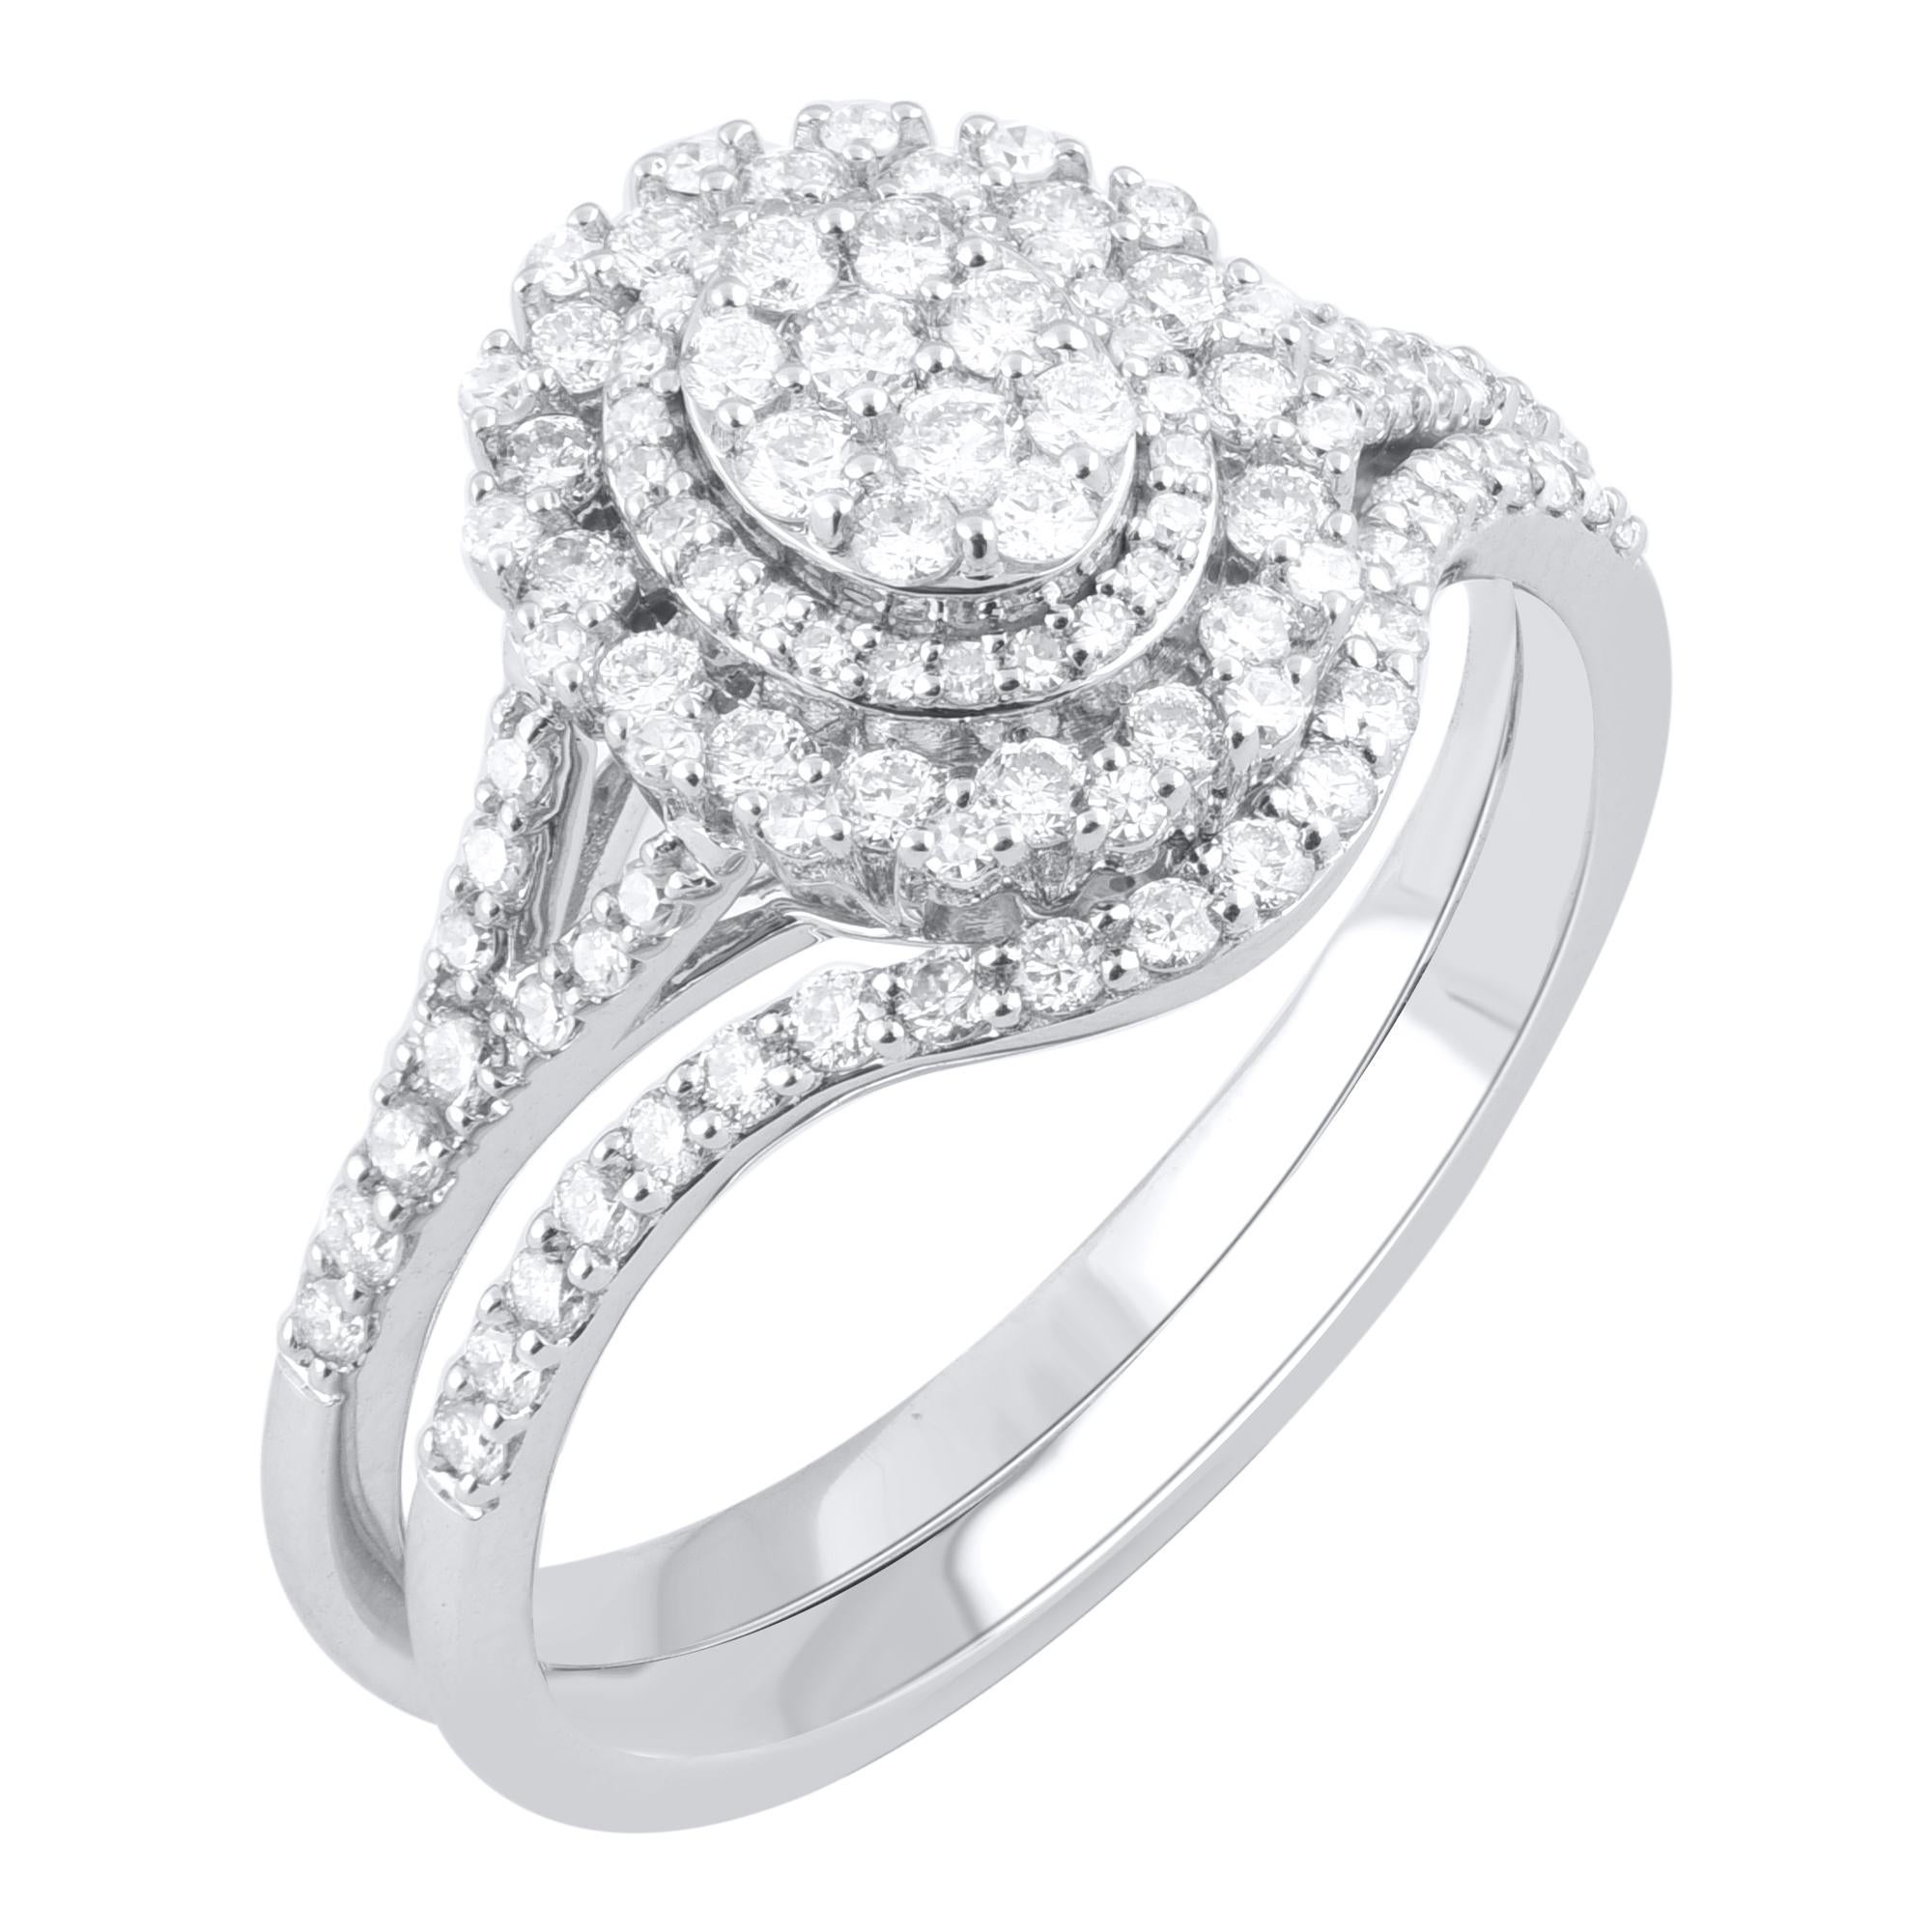 Make that special moment magical with the exquisite diamond bridal ring set. This classic engagement ring is studded with single cut & brilliant cut 107 diamond in prong setting. This ring is designed in 14-karat white gold. The total diamond weight